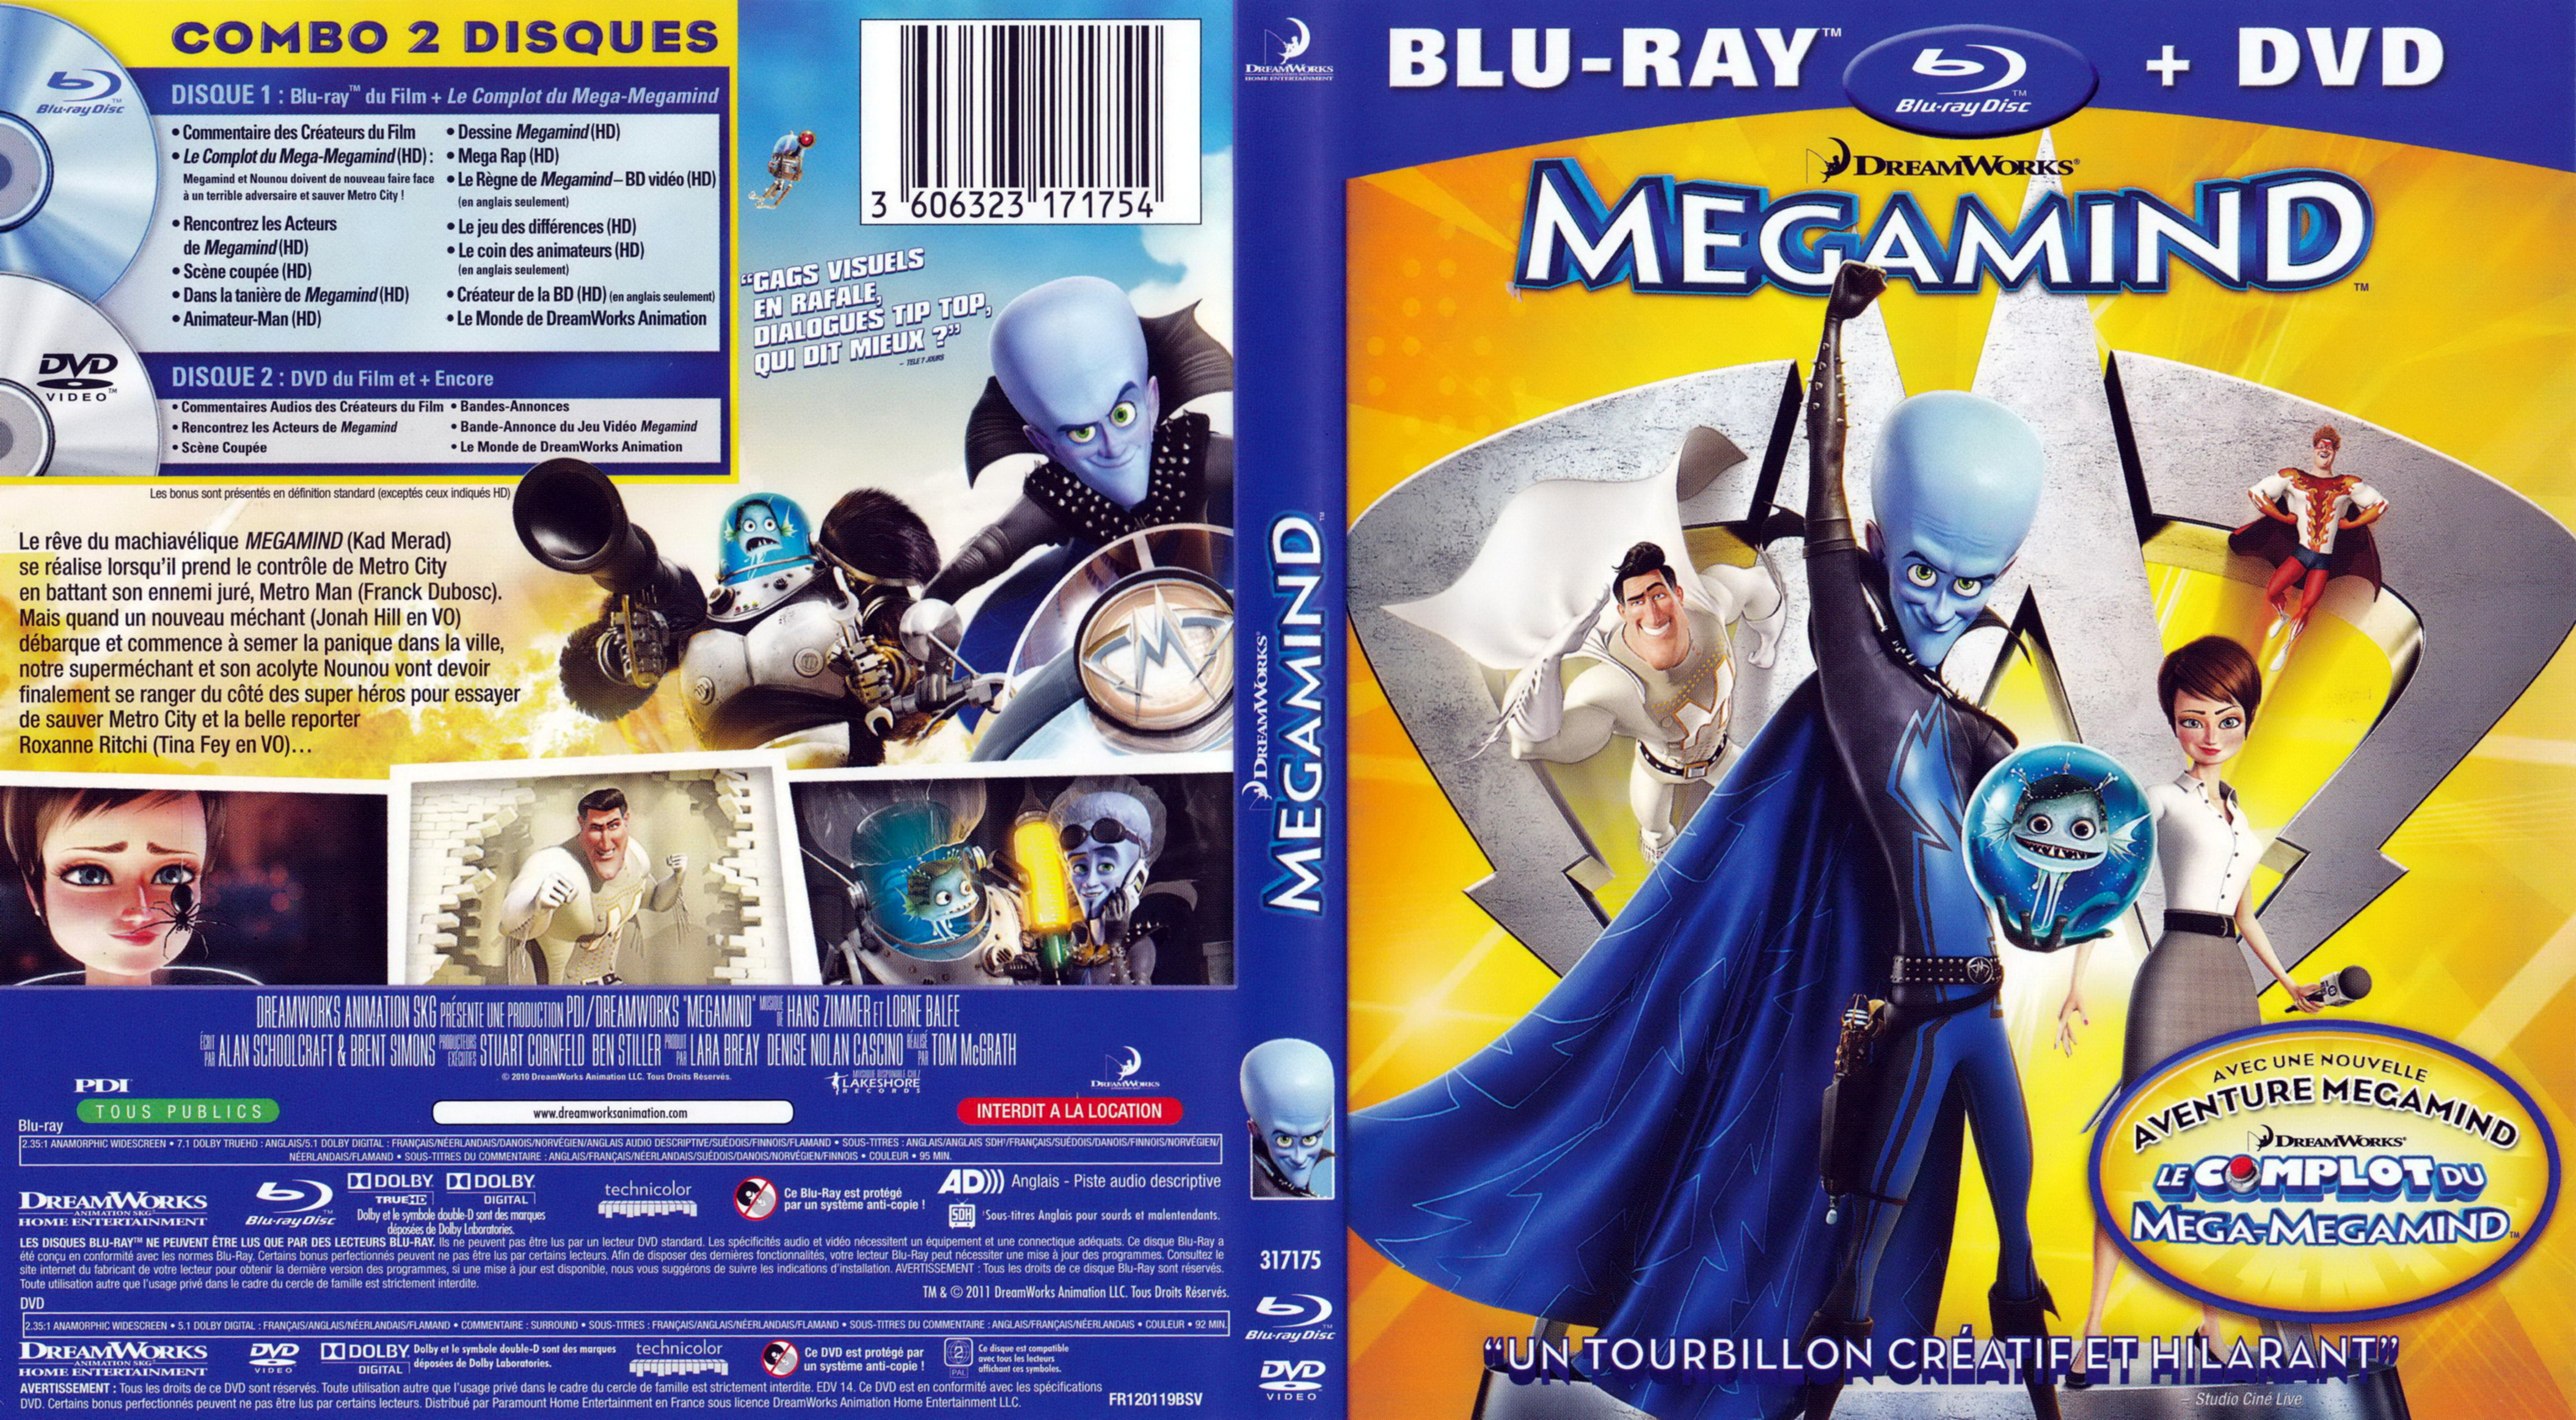 Jaquette DVD Megamind (BLU-RAY)